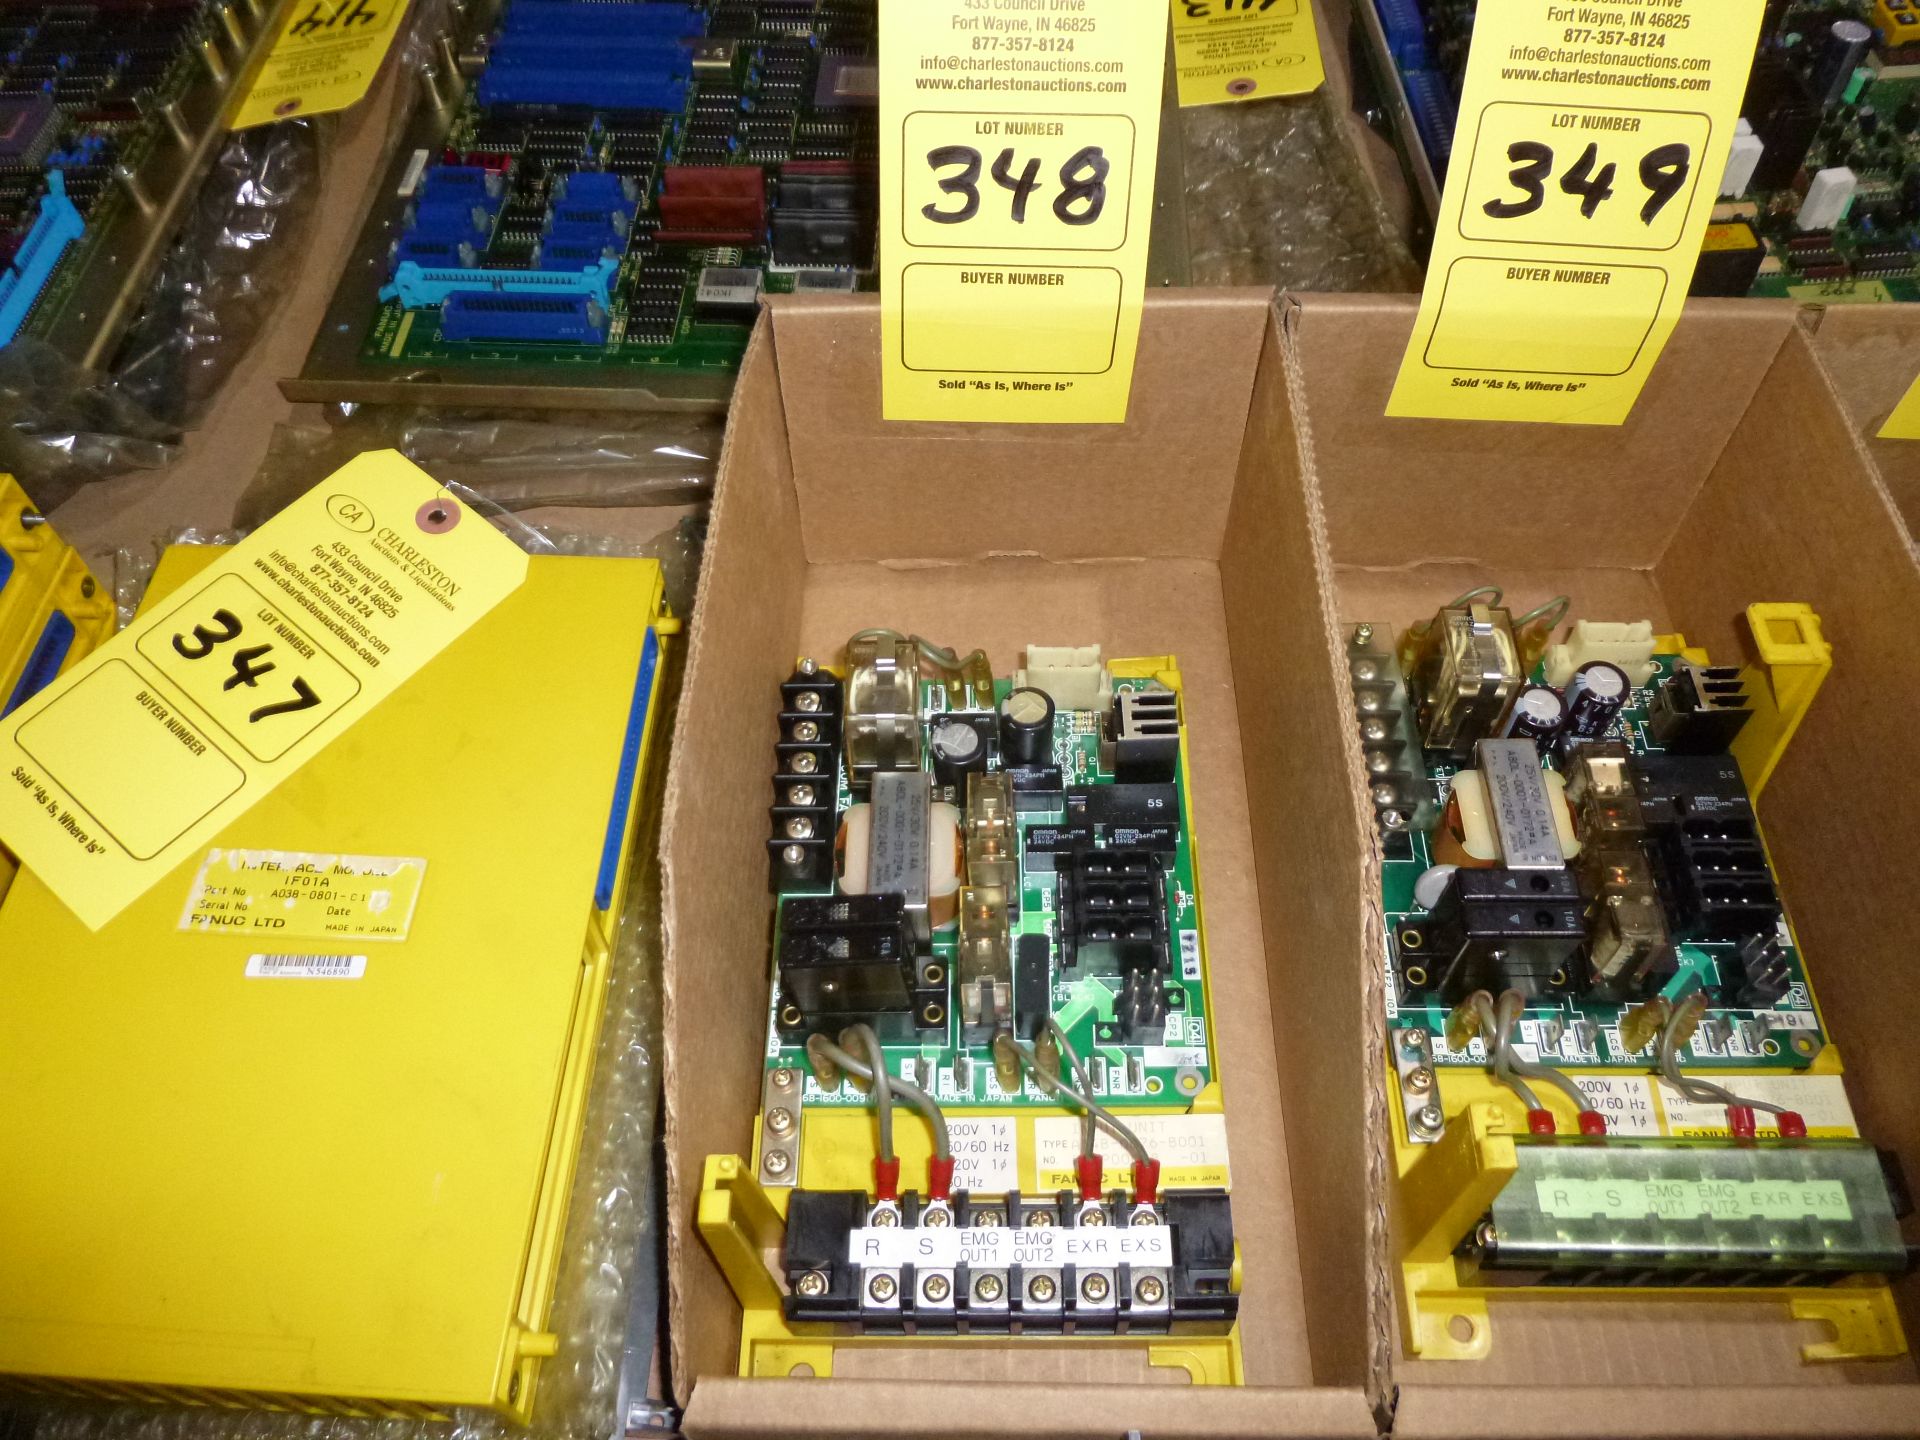 Fanuc input unit model A14B-0076-B001, as always with Brolyn LLC auctions, all lots can be picked up